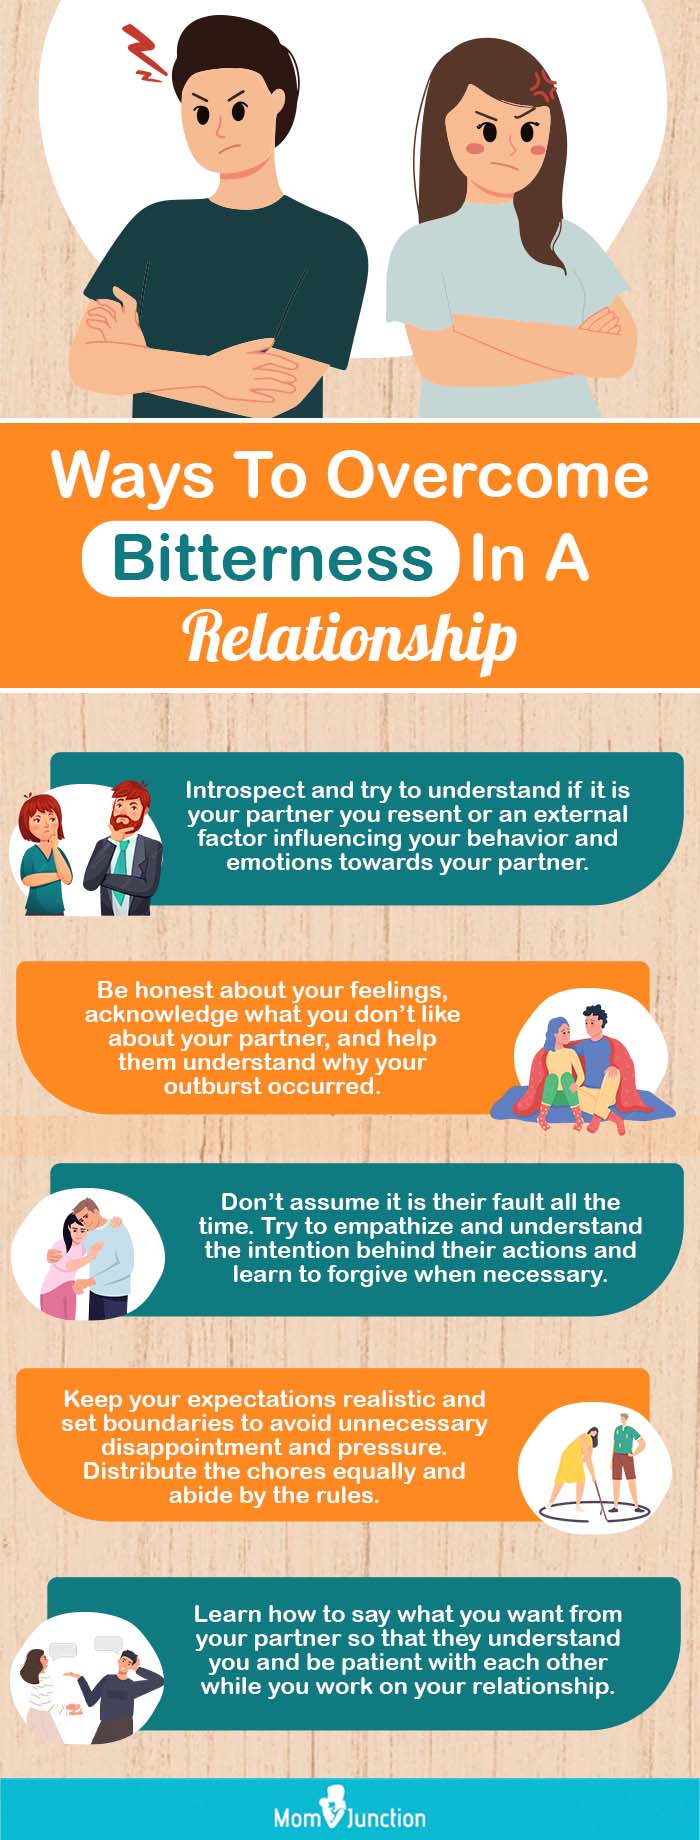 ways to overcome bitterness in a relationship [infographic]